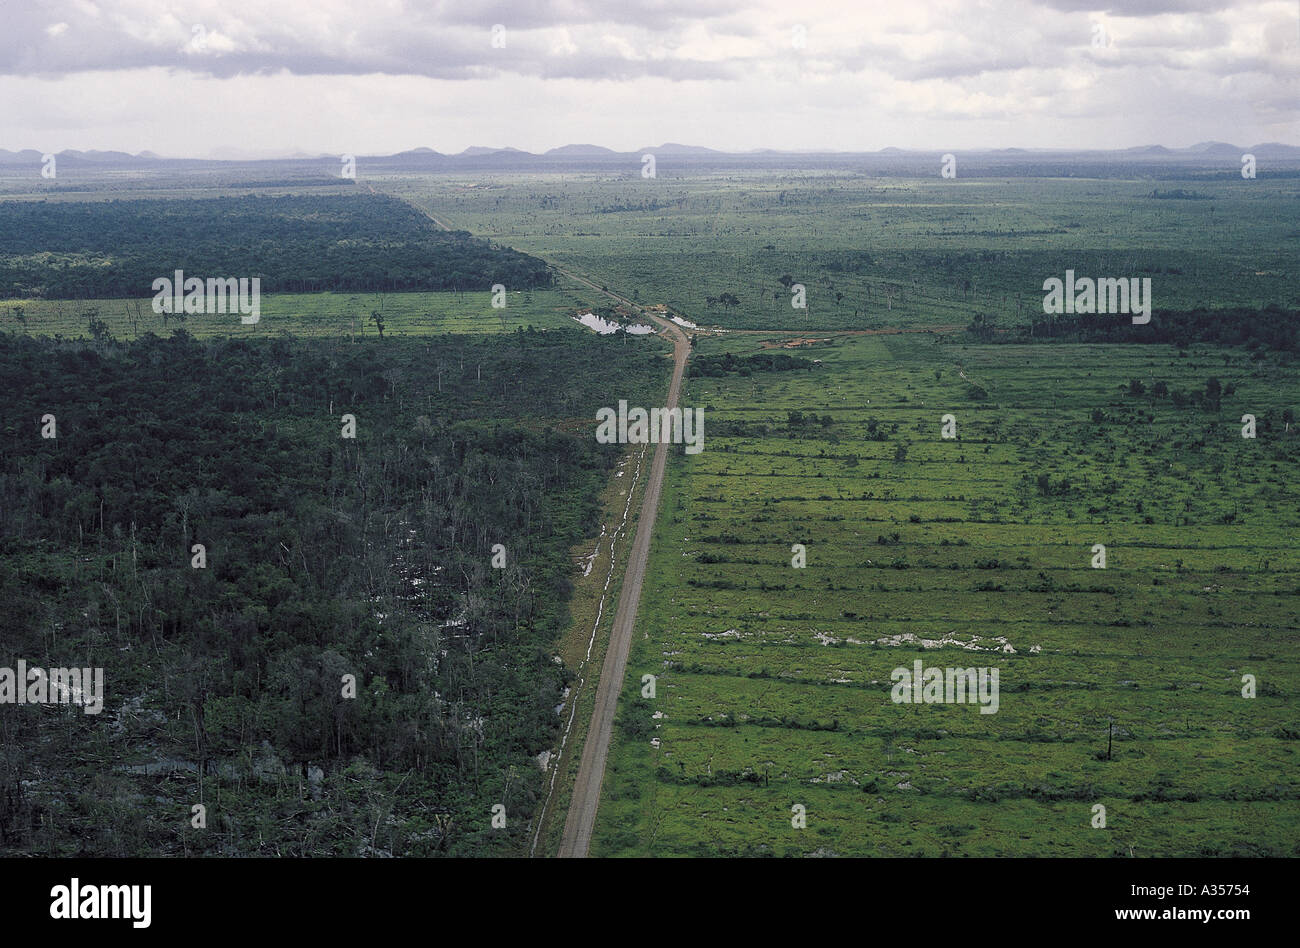 Amazon Brazil Aerial view of straight roads separating newly deforested areas and degraded rain forest Stock Photo